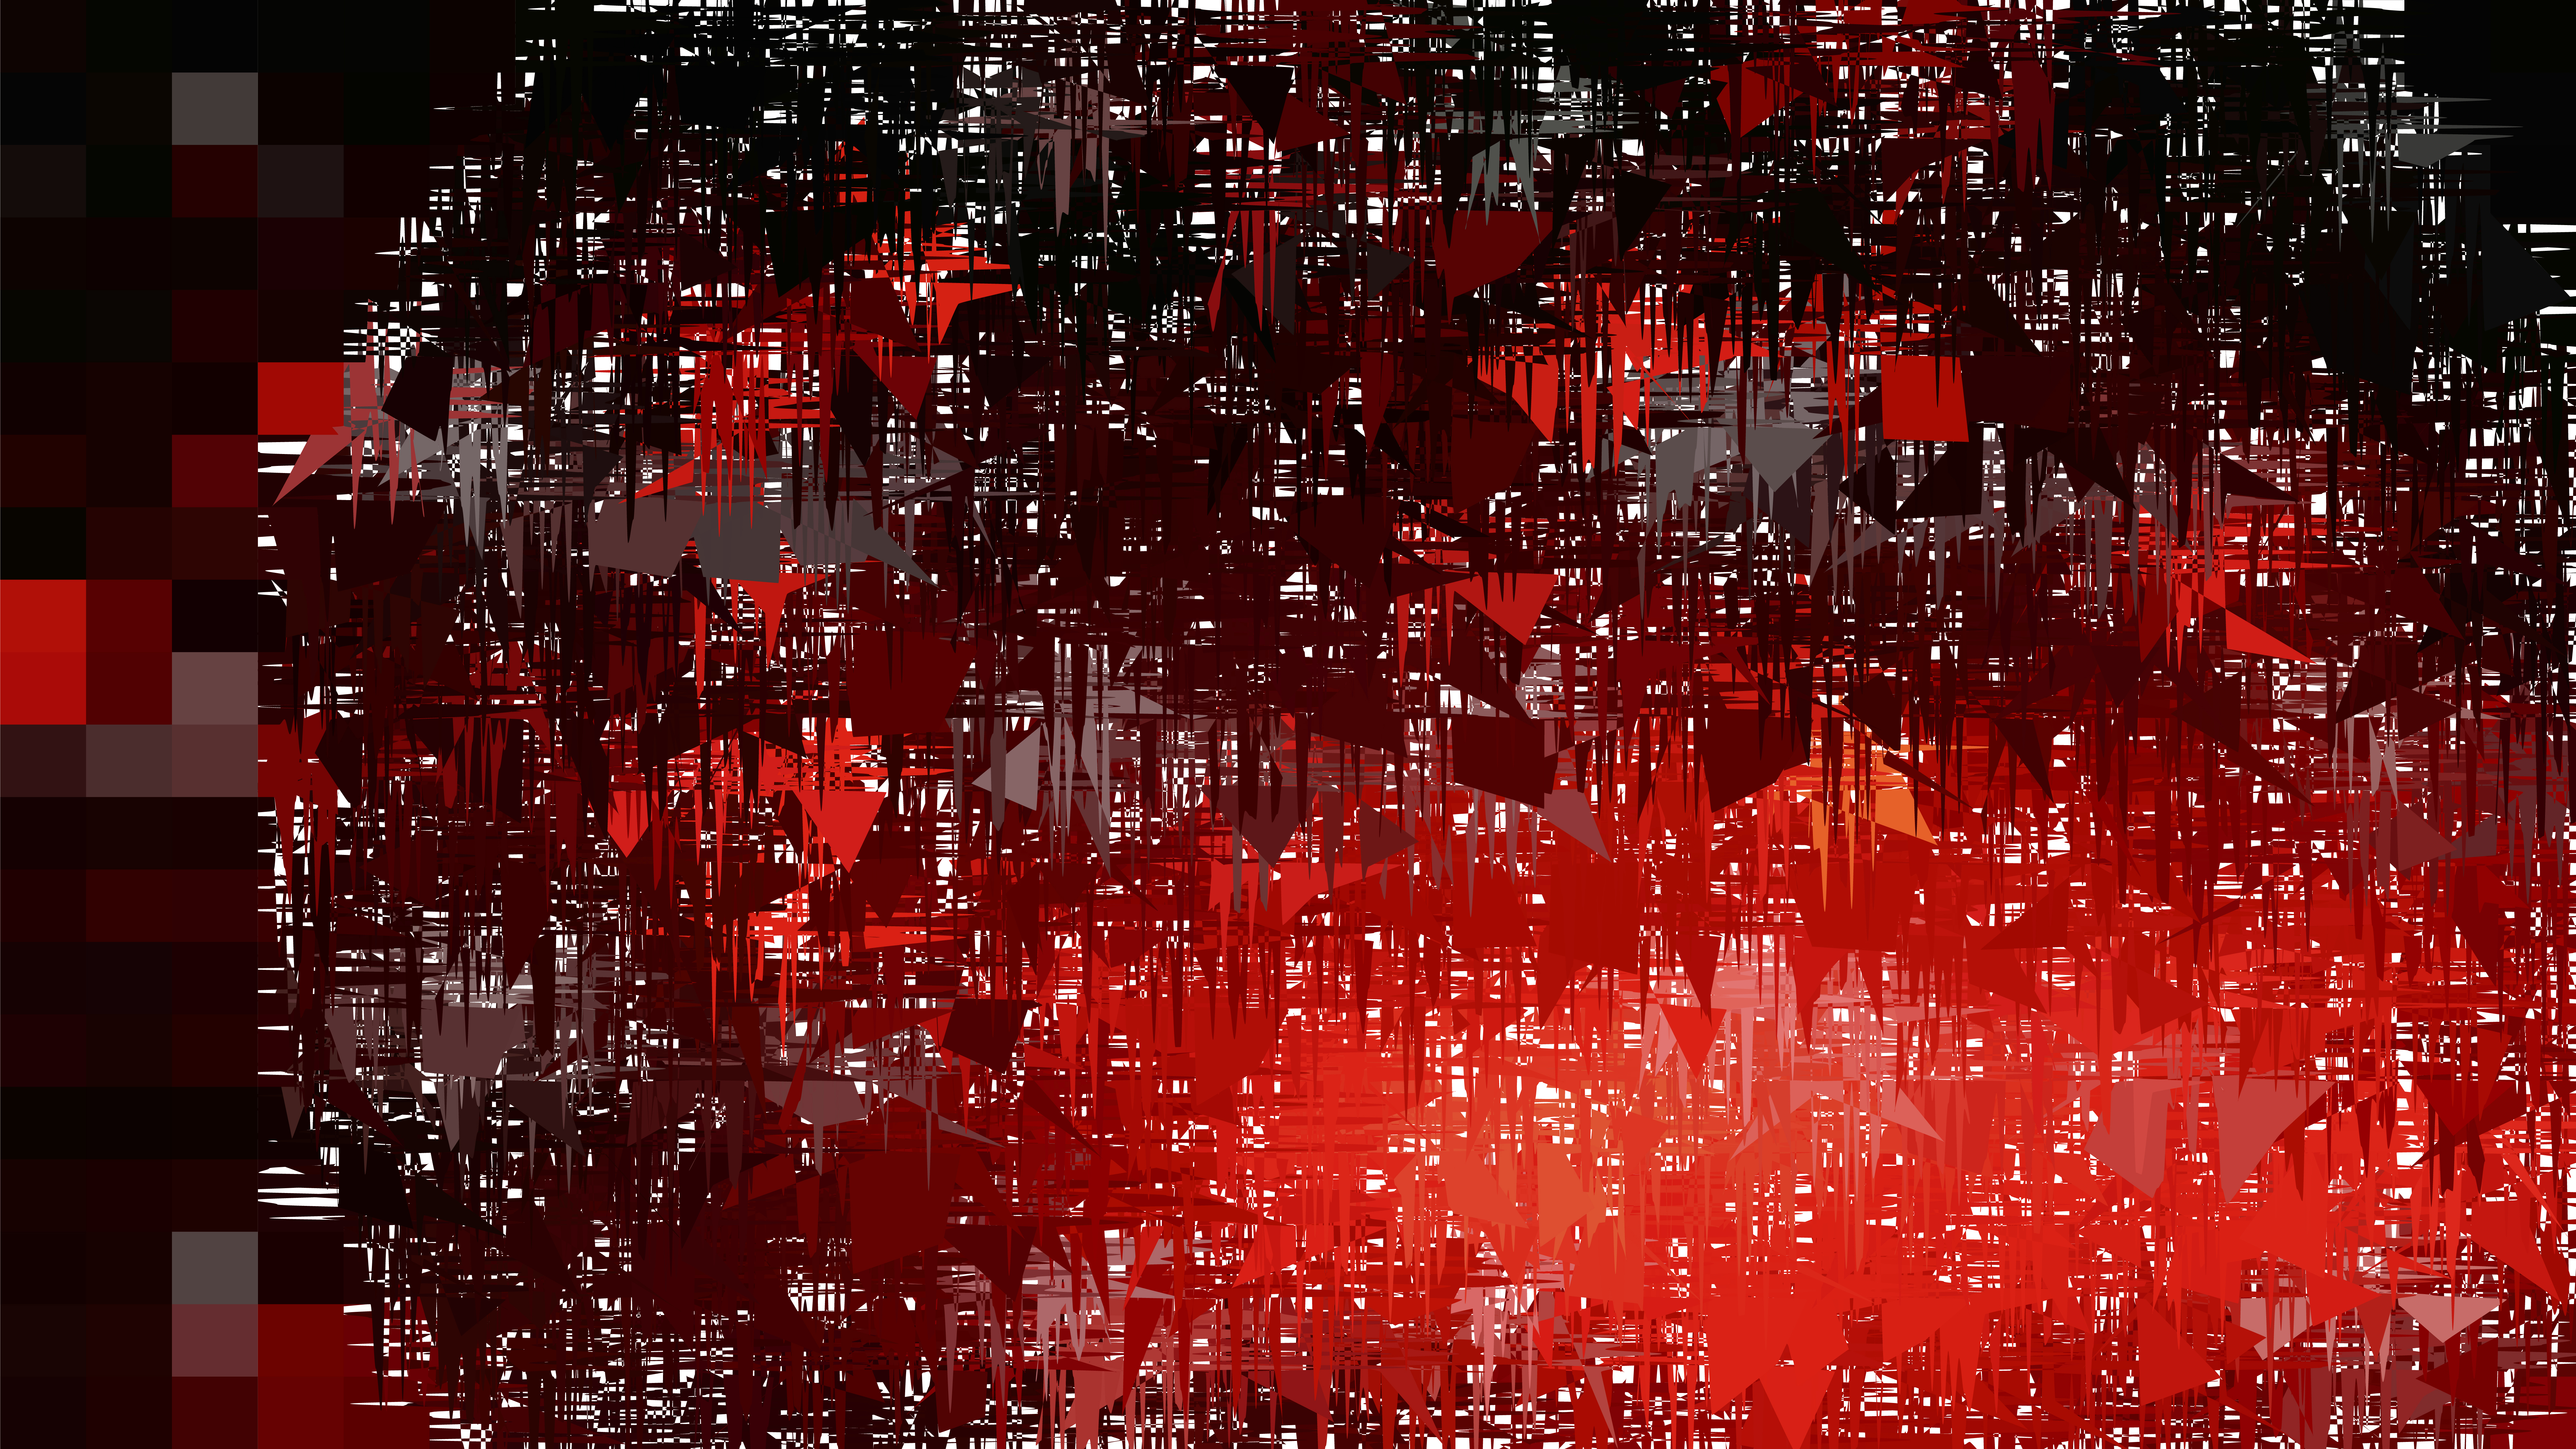 Free Abstract Red and Black Texture Background Vector Image